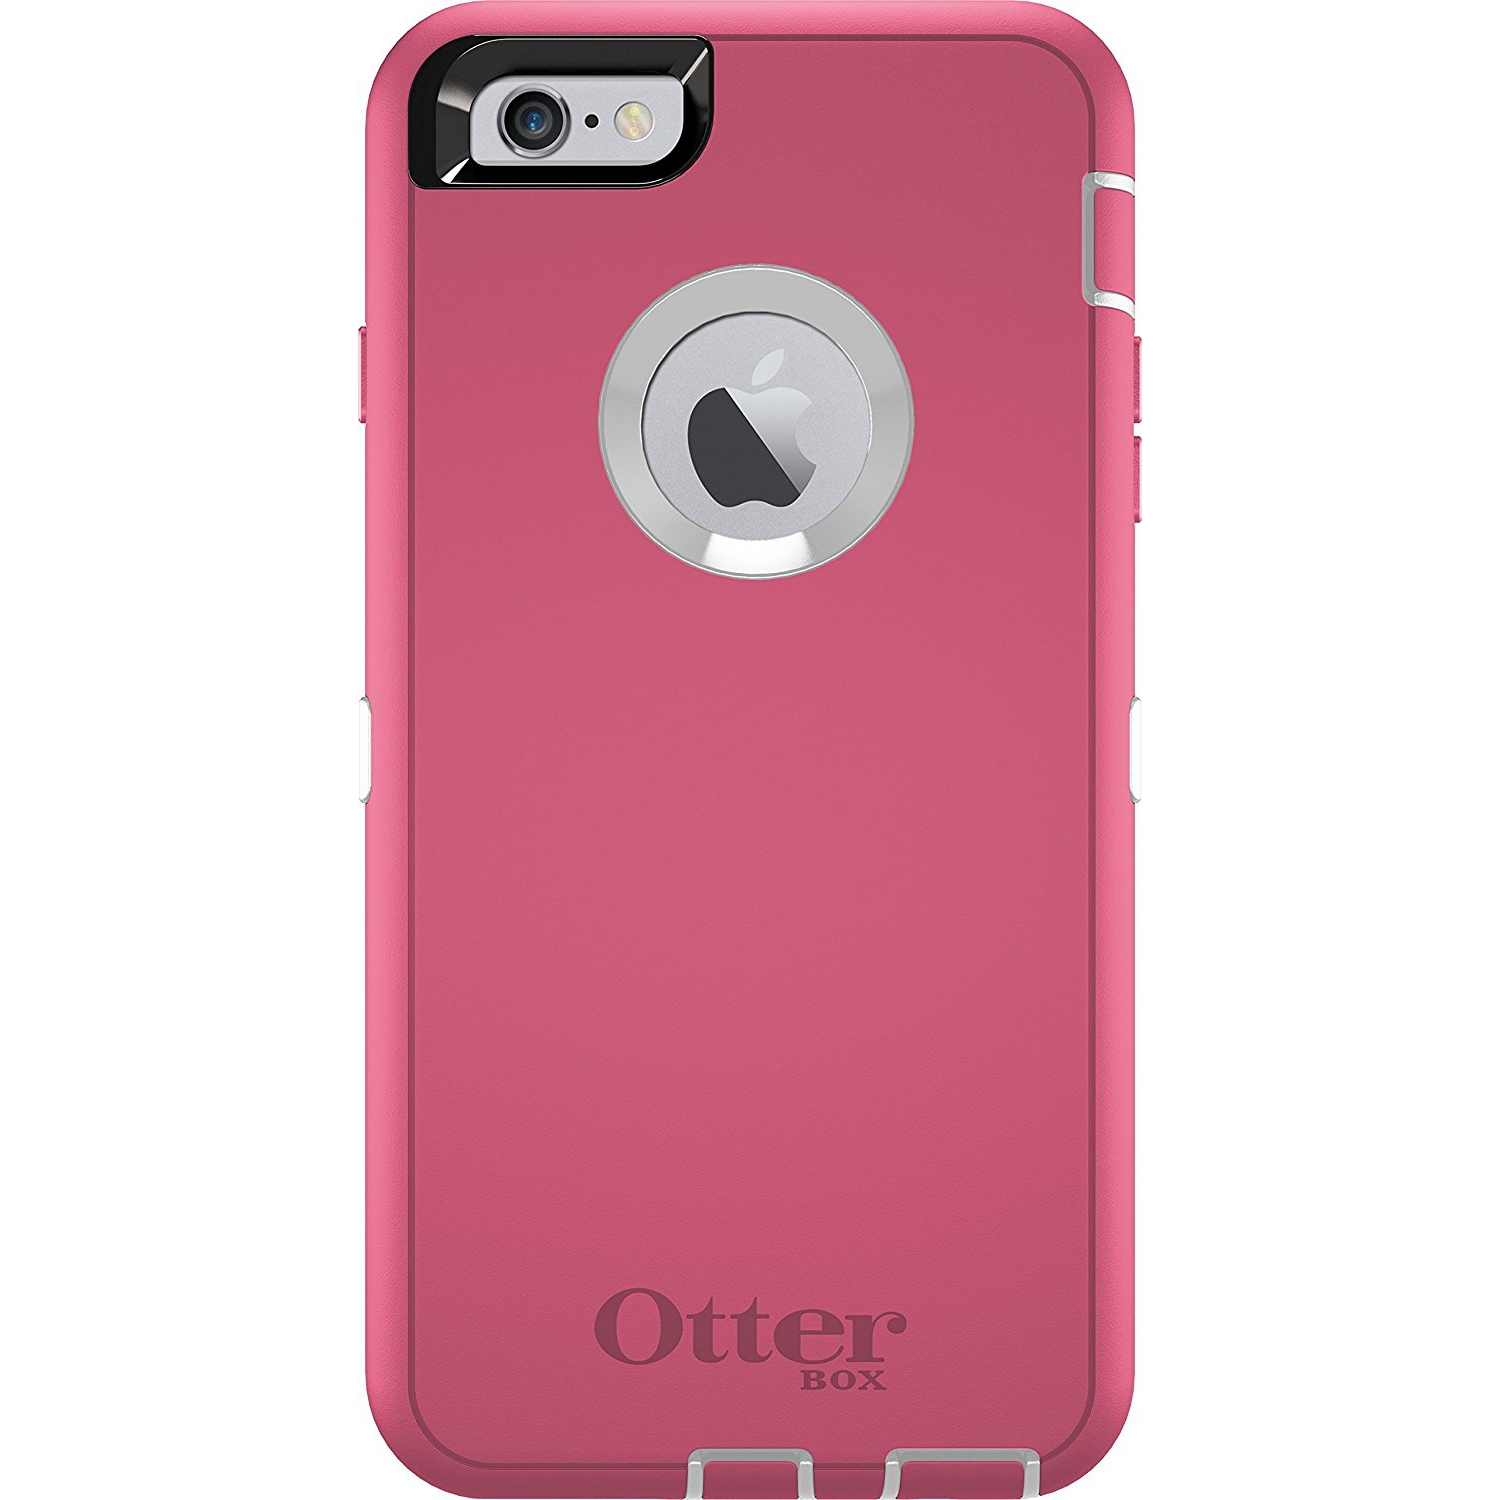 OtterBox DEFENDER iPhone 6 Plus 6s Plus Case - Retail Packaging - HIBISCUS FROST (WHITE HIBISCUS PINK)